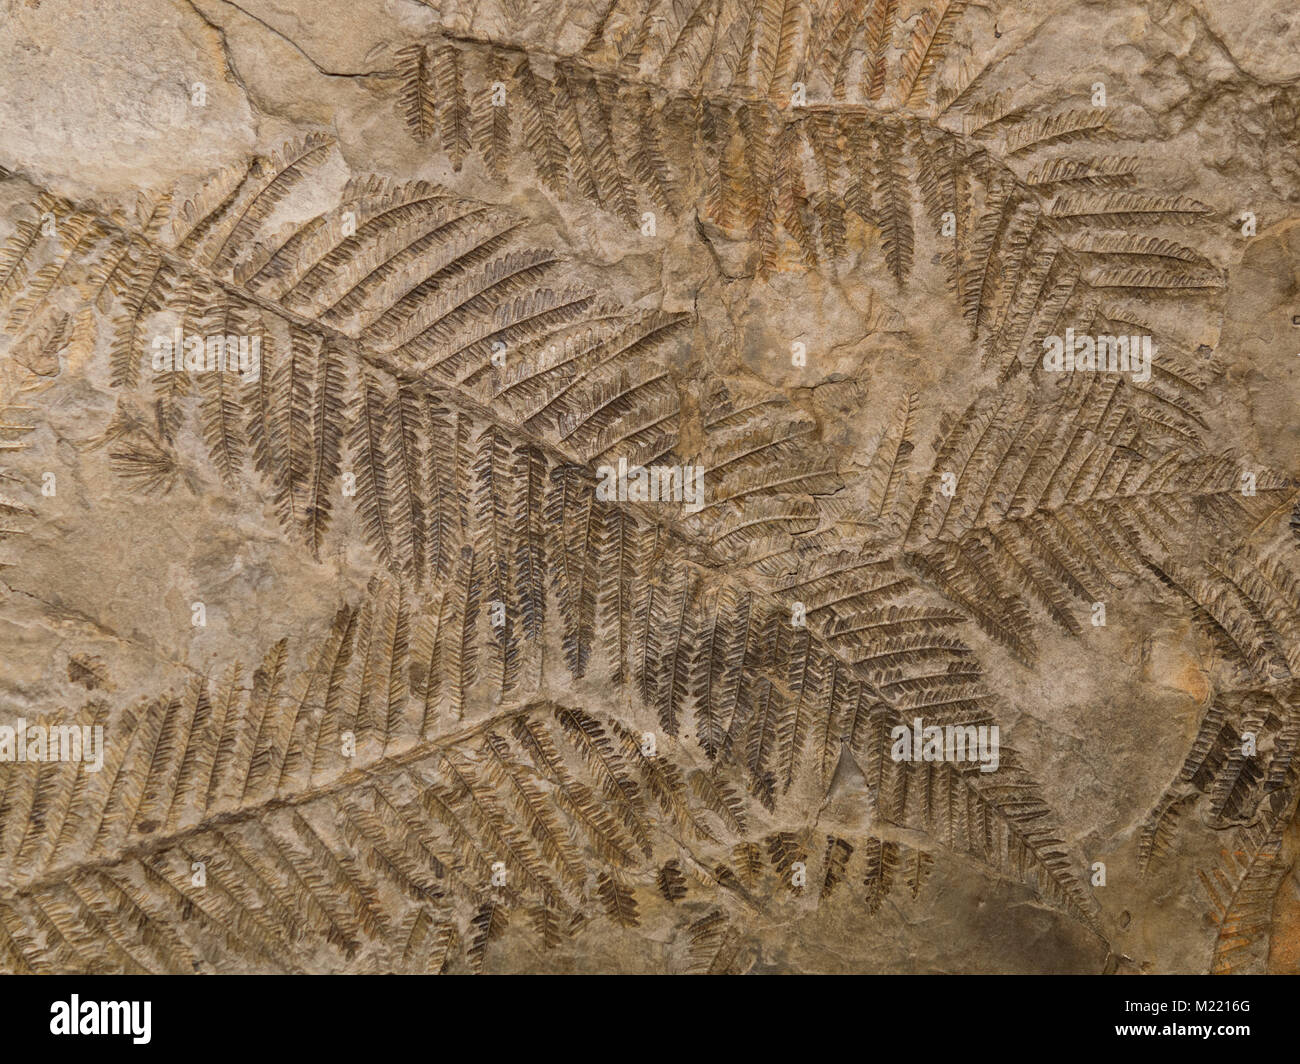 Petrified prehistorical ferns frond imprint on stone with plants branches and leaves Stock Photo